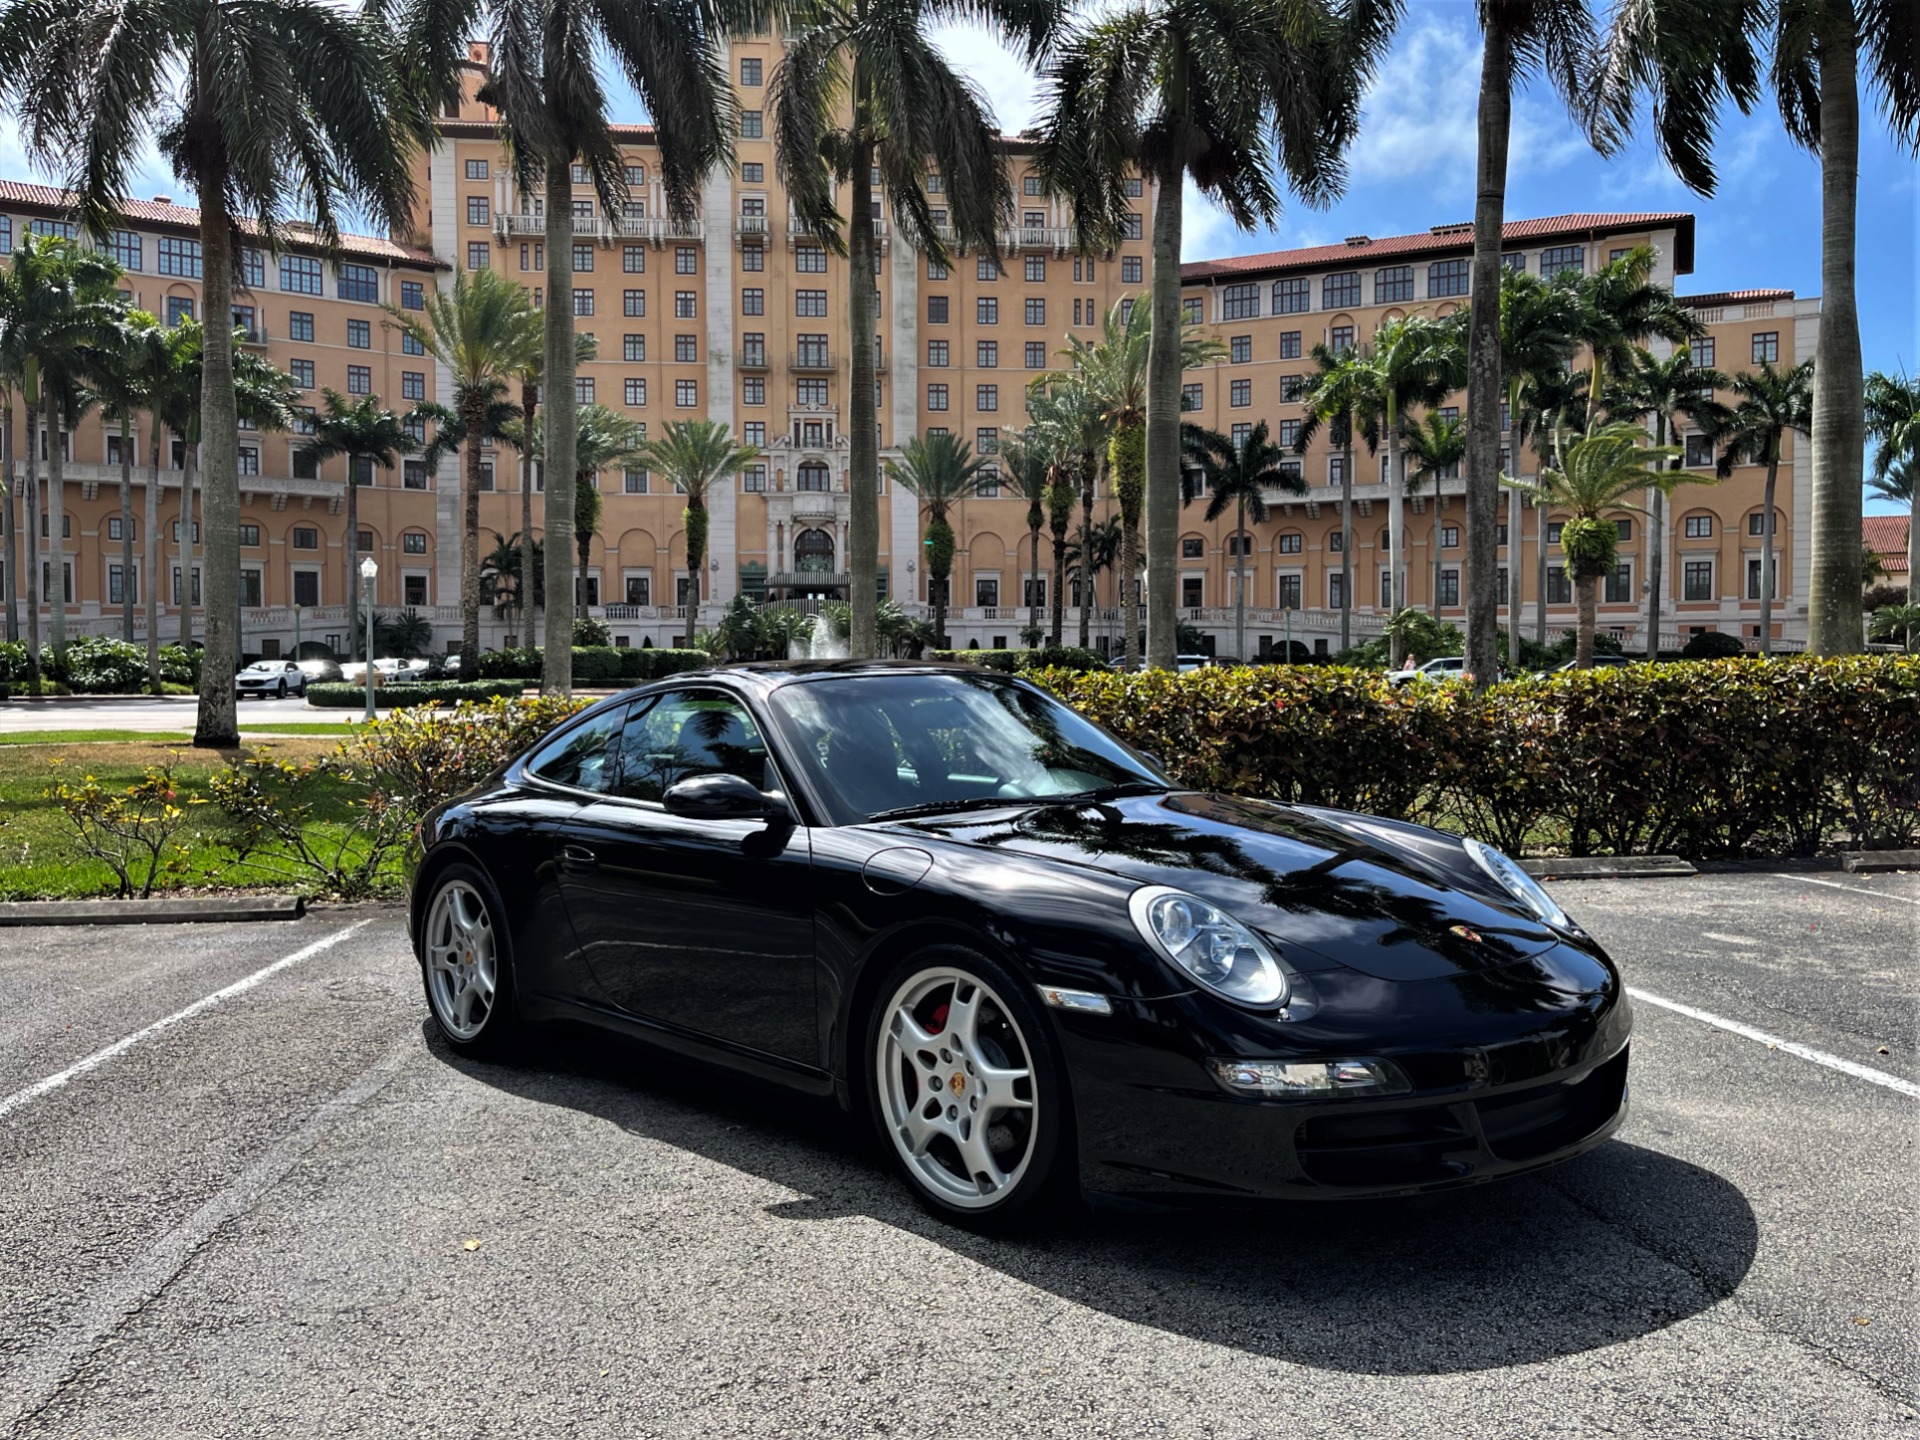 Used 2005 Porsche 911 Carrera S For Sale ($51,850) | The Gables Sports Cars  Stock #742329